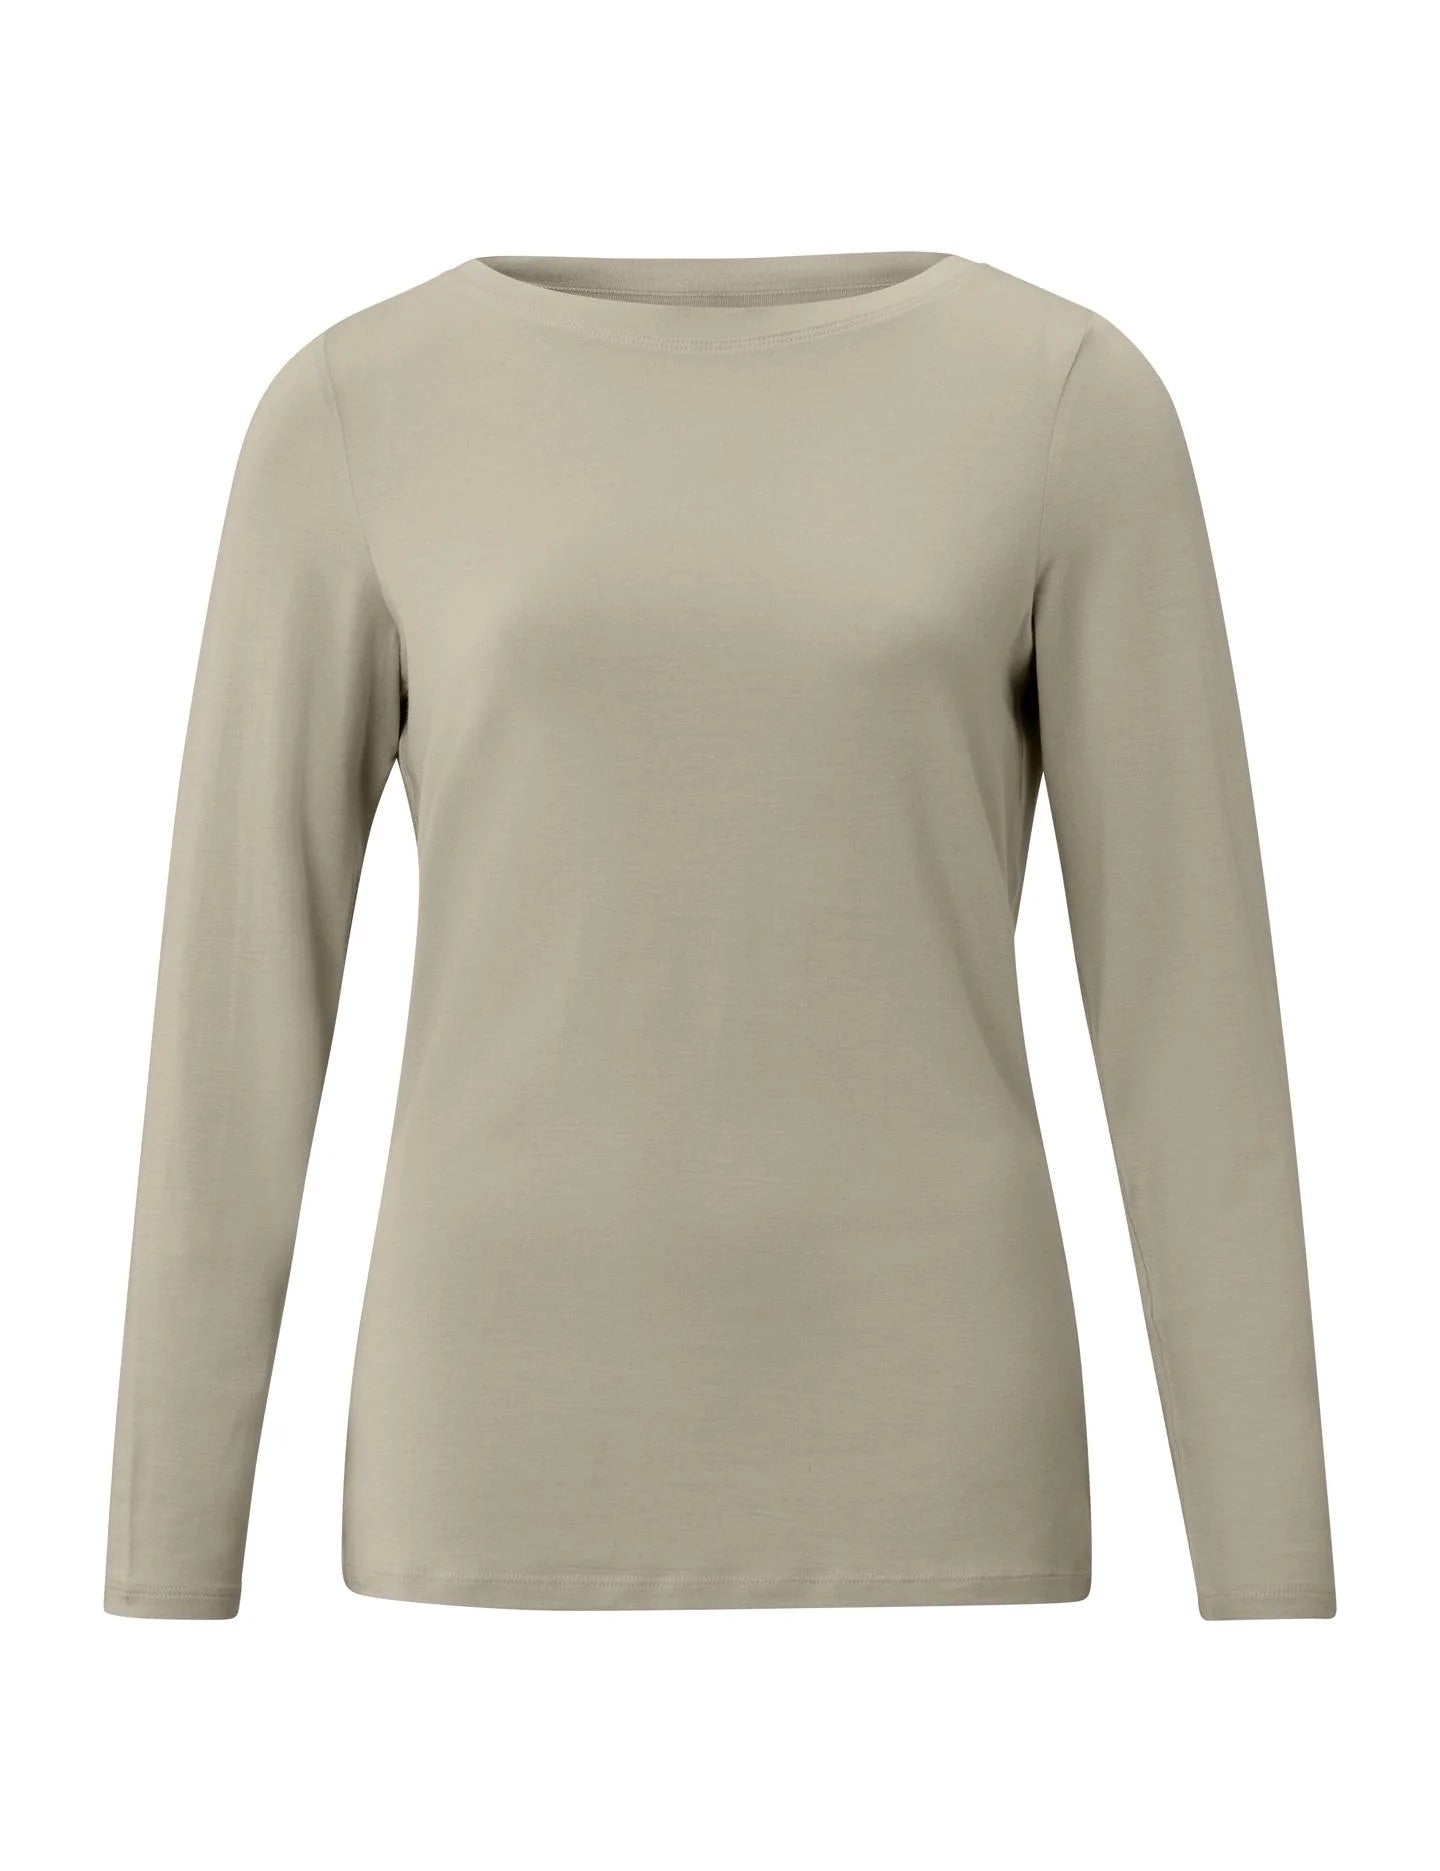 t-shirt-with-boatneck-and-long-sleeves-in-regular-fit-aluminium-beige_386e32e6-b66a-459c-9f0b-d44ca556d056_2880x_jpg.jpg